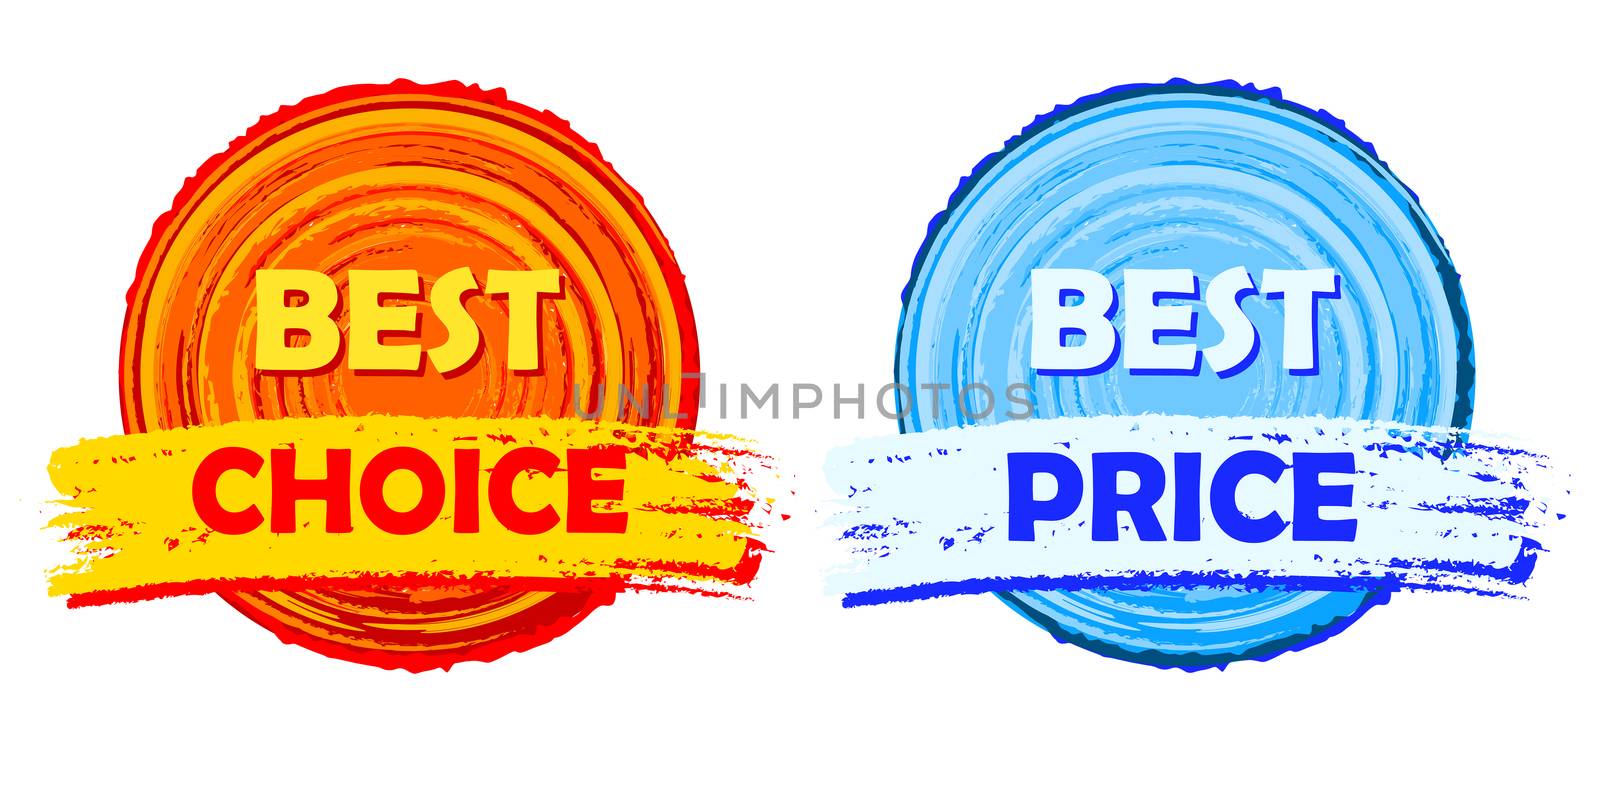 best choice and best price - text in yellow, orange, red and blue round drawn labels, business shopping concept